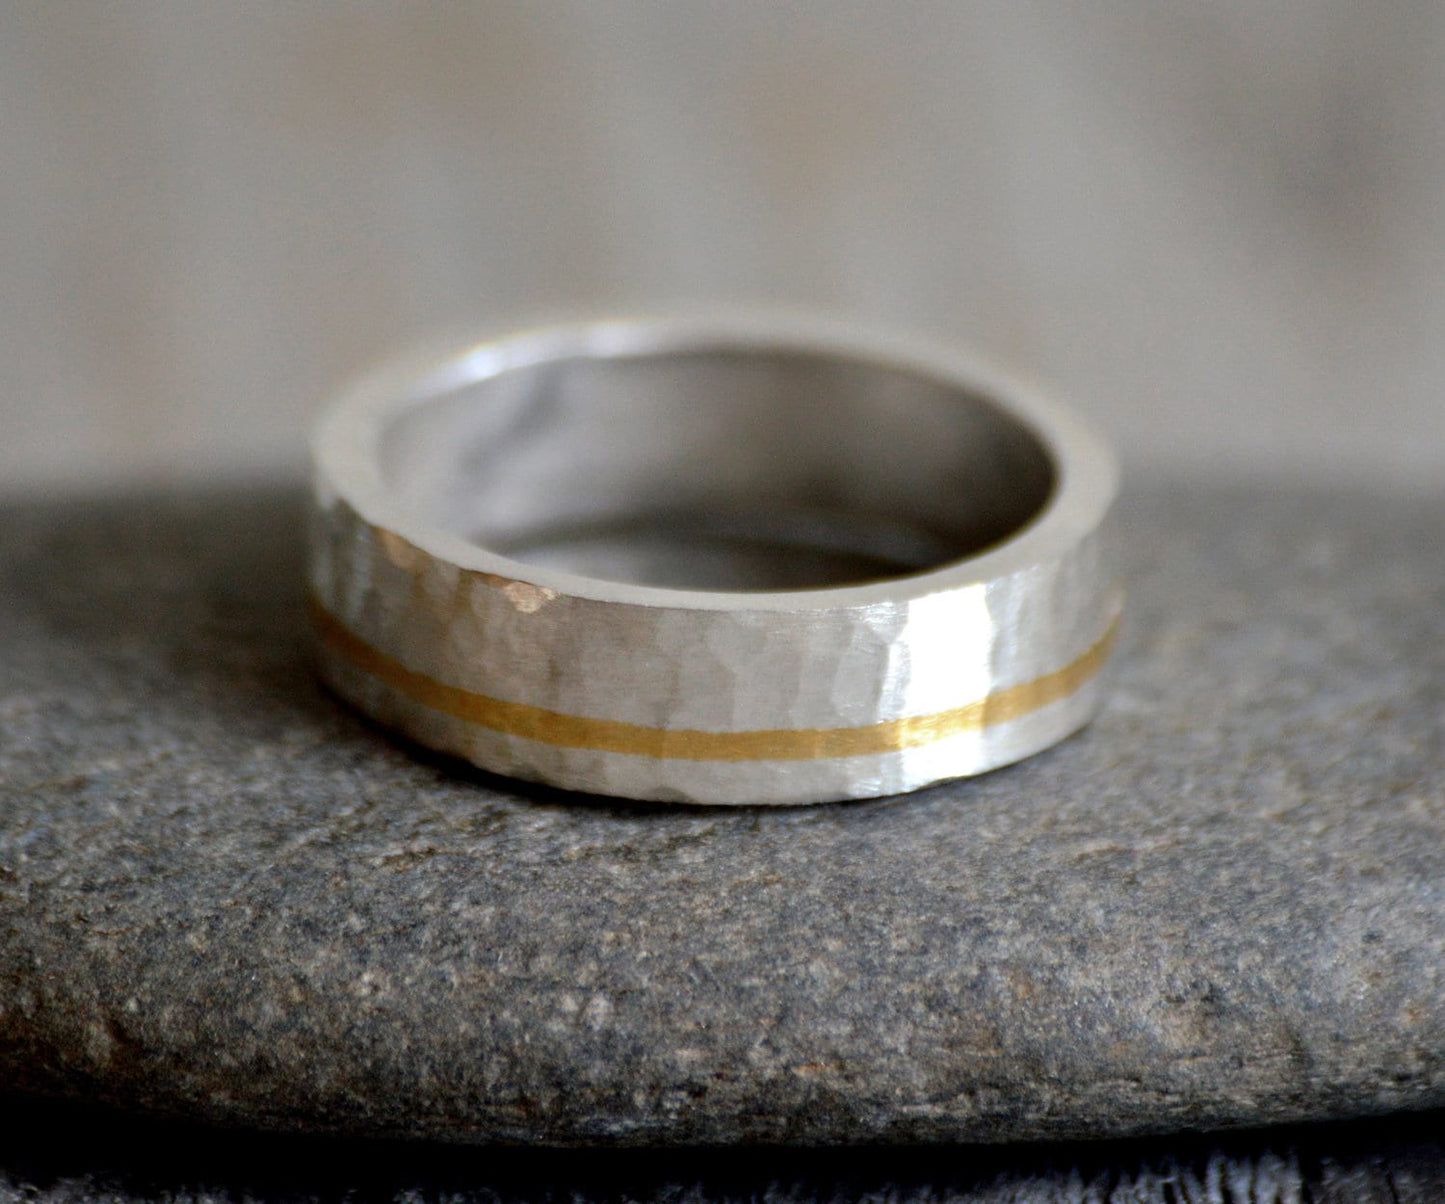 Hammered Effect Wedding Band with 24K Gold Inlay, Rustic Wedding Band with 24K Gold Inlay, 5mm Wedding Ring